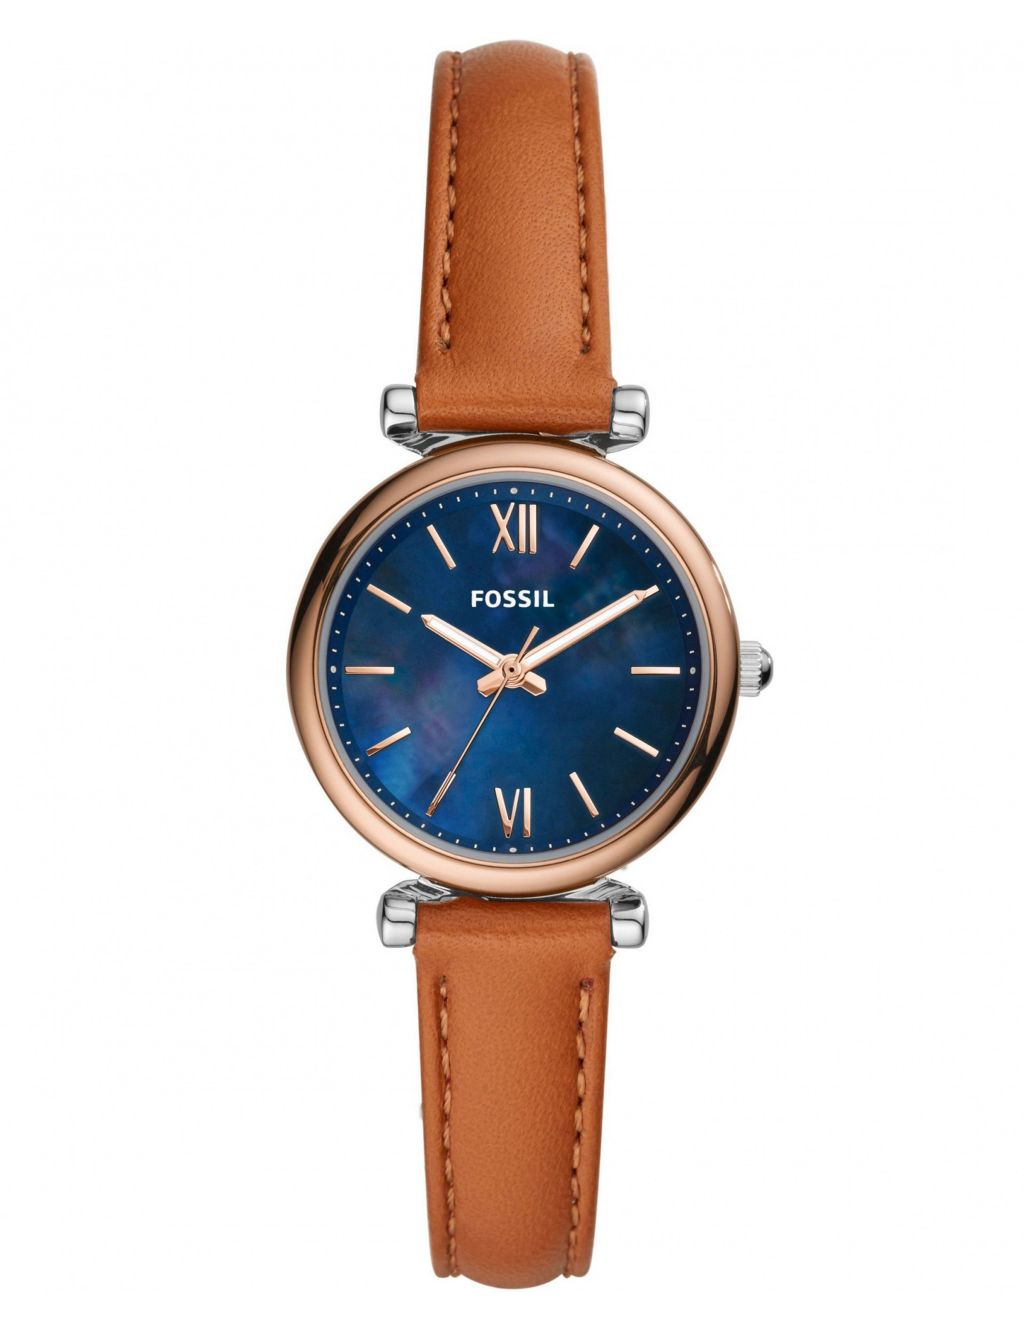 Fossil Carlie Brown Leather Watch image 1